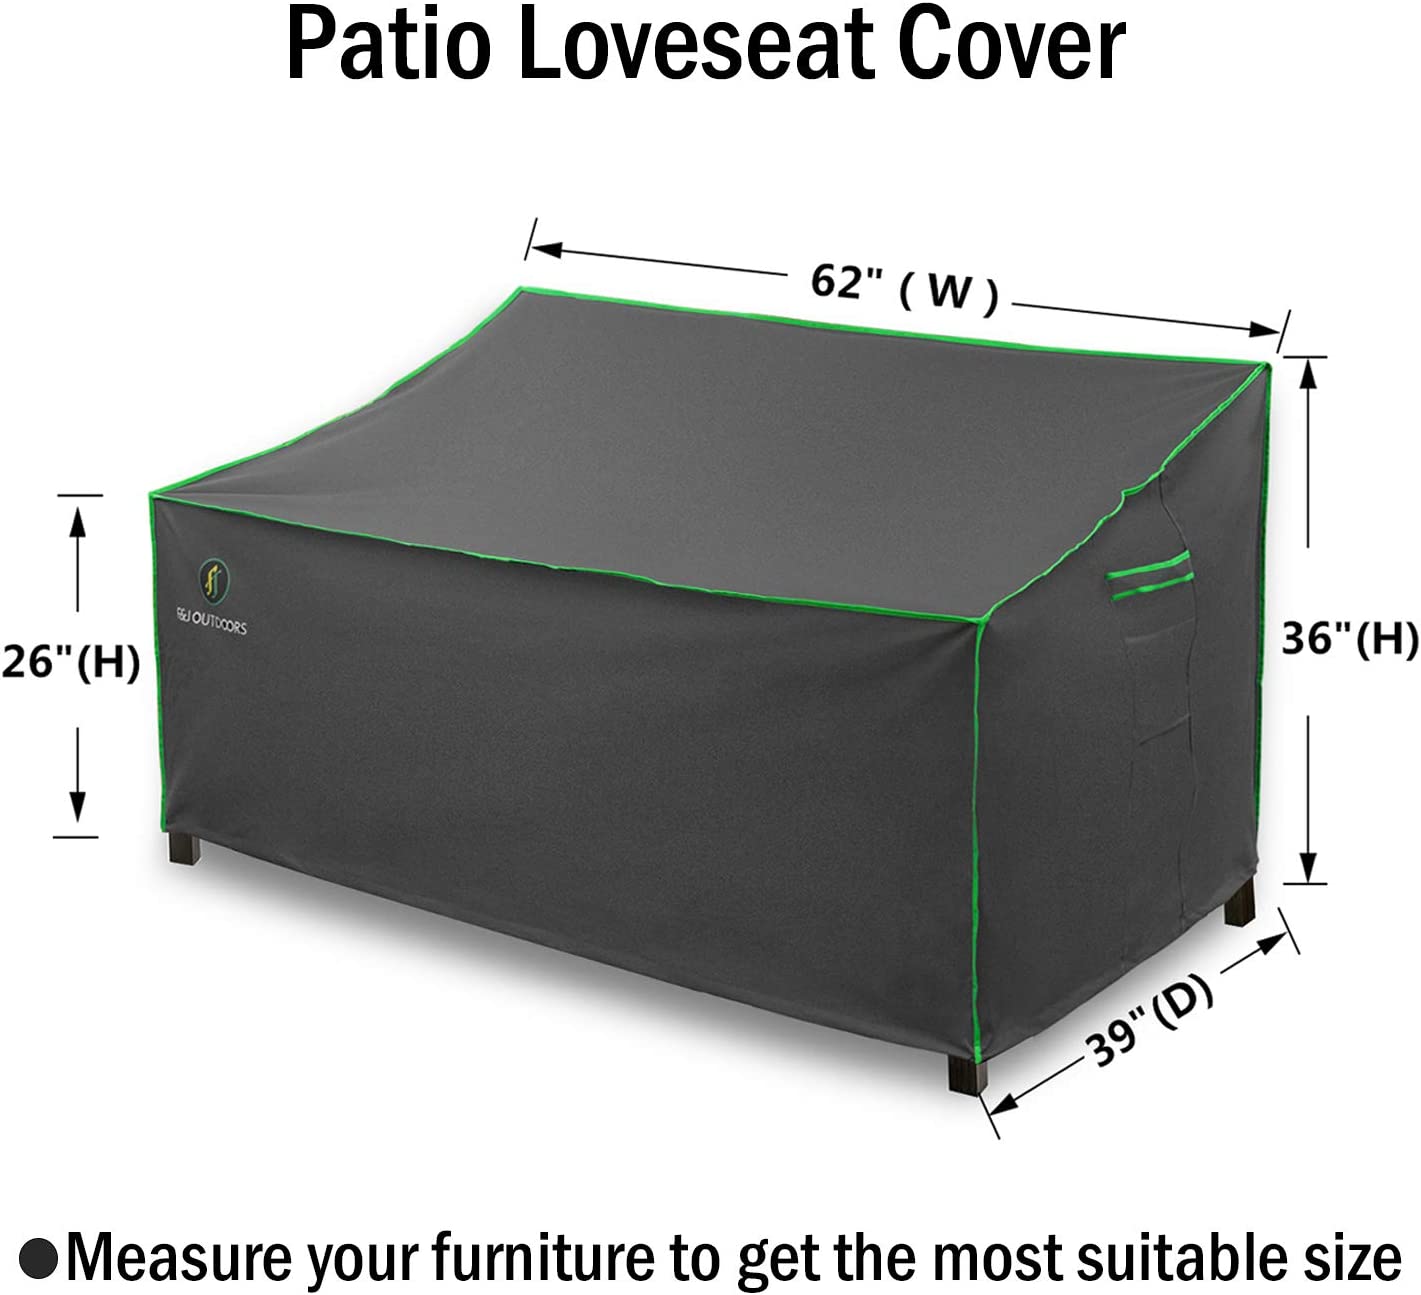  US Cargo Control Heavy Duty Quilted Loveseat Cover - 64 Inches  x 46 Inches - Black/Green Furniture Pad for Moving/Storage -  Cotton/Polyester Blend Fabric - 9 Pounds - Washable, Reusable : Clothing,  Shoes & Jewelry